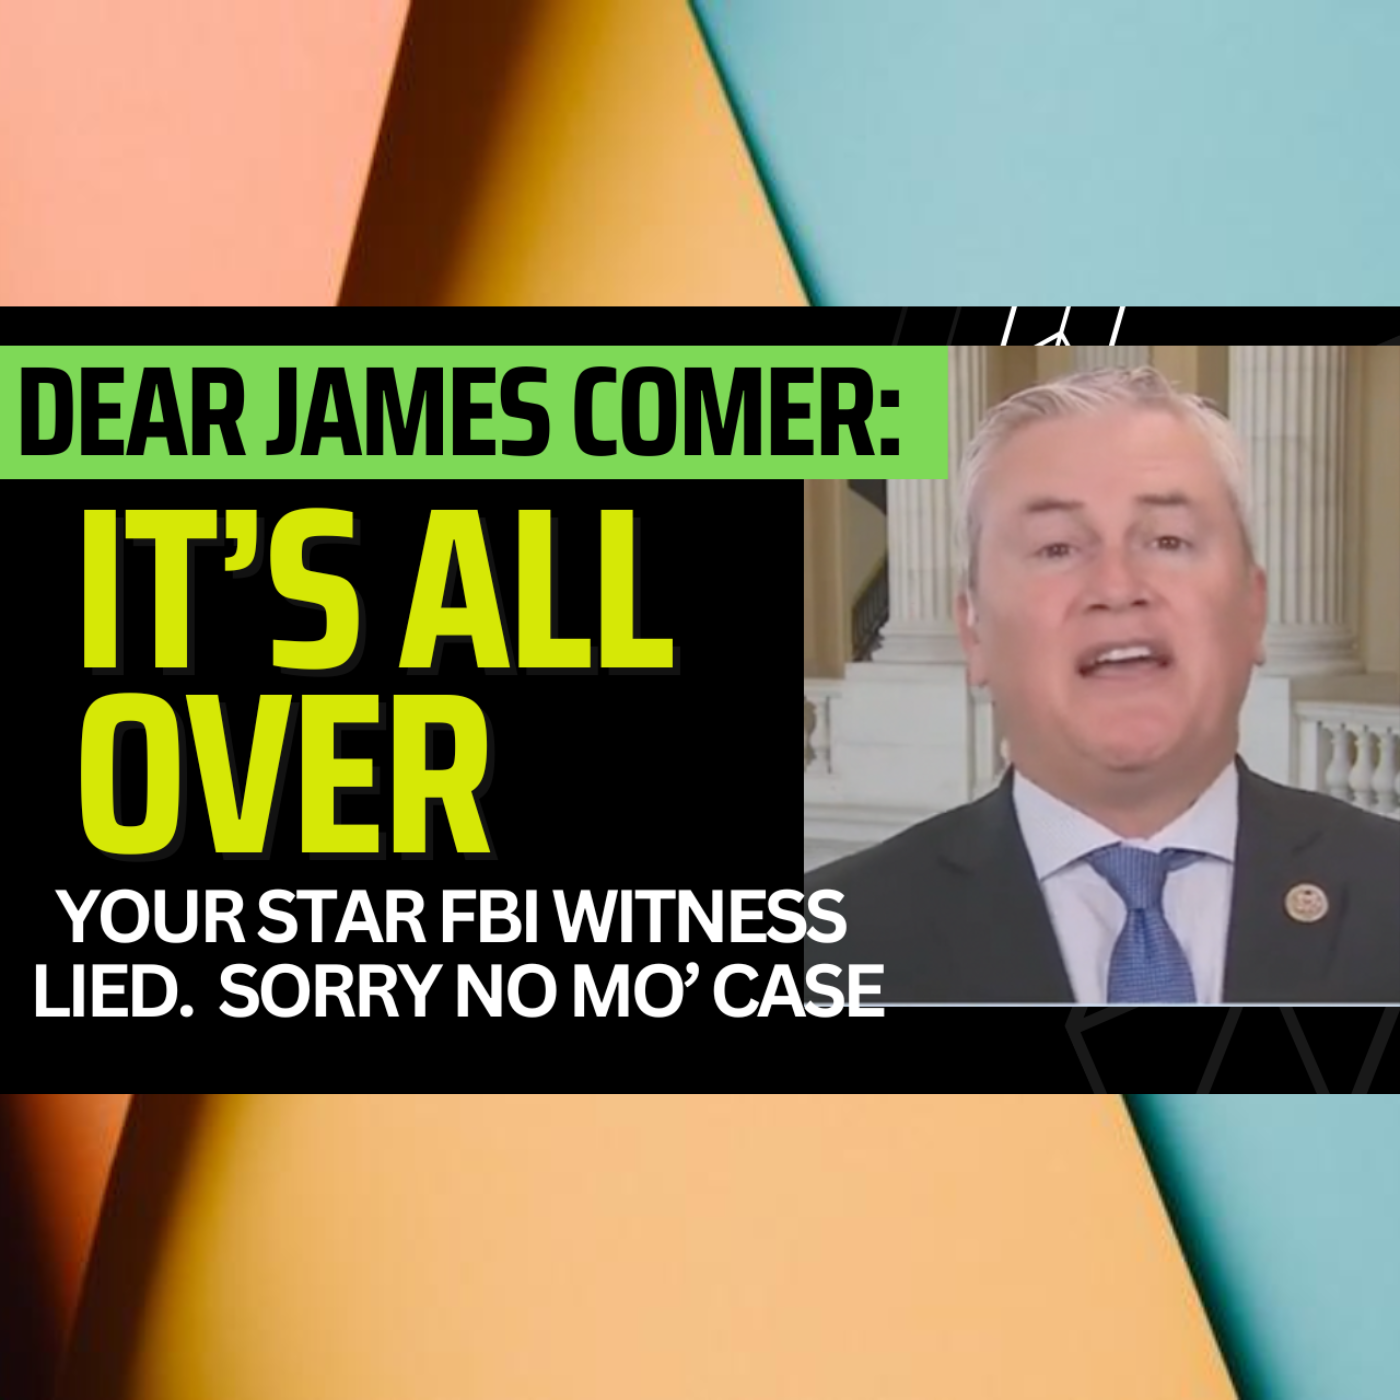 James Comer, aren't you embarrassed?